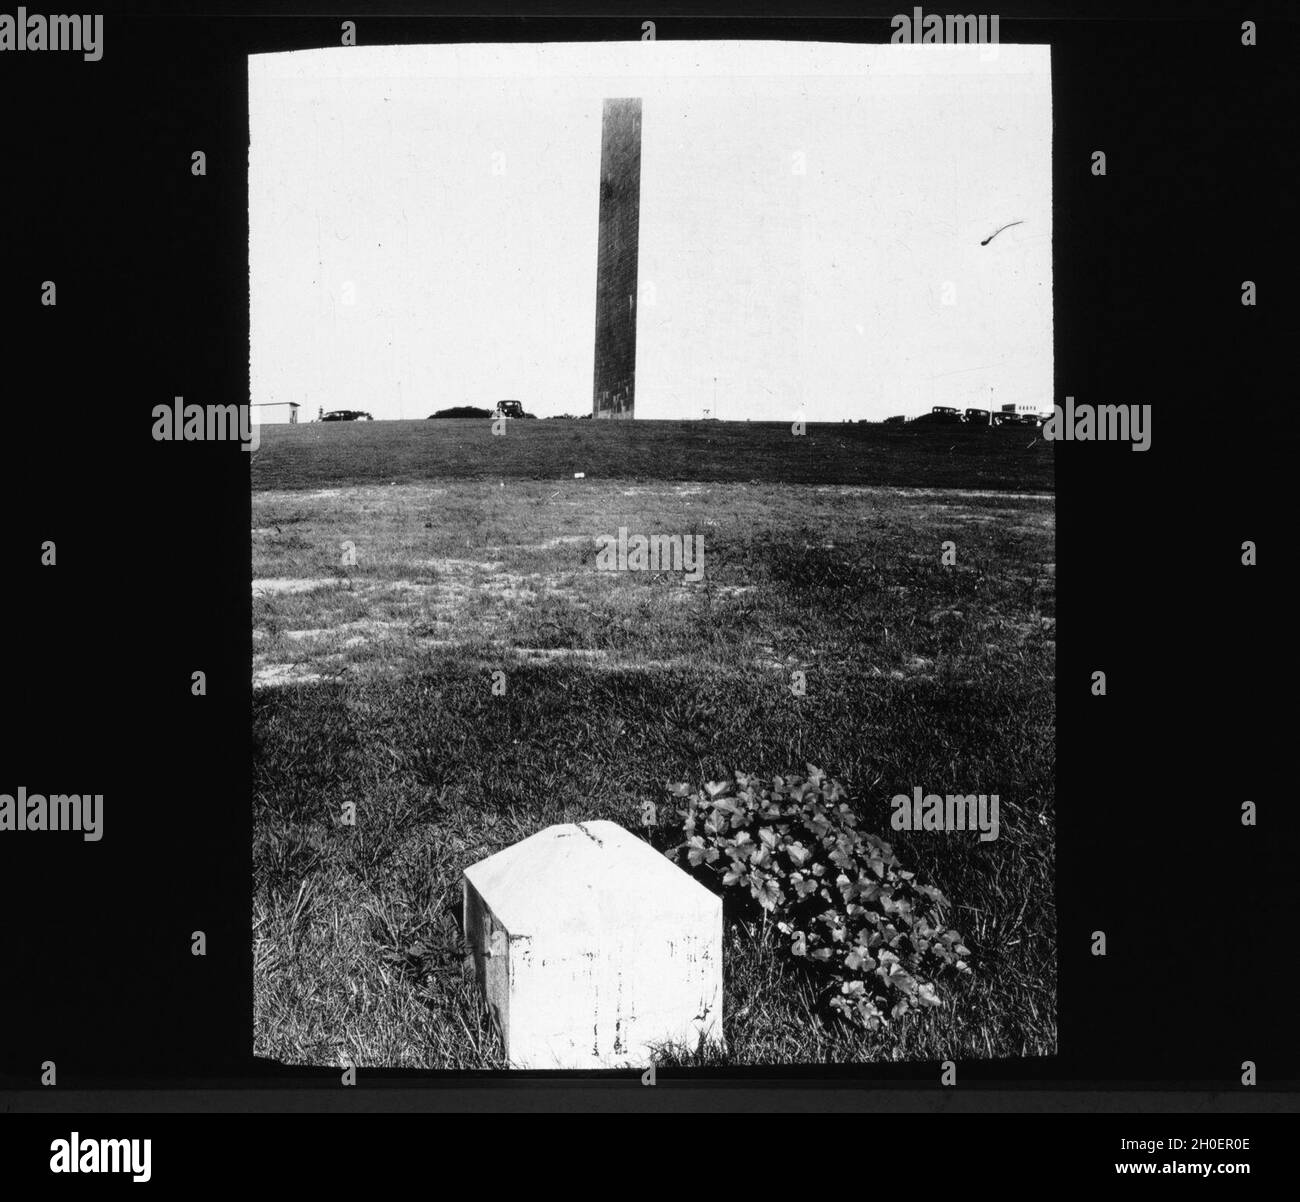 Lantern Slide 4: Jefferson Pier or Stone; erected in 1792 at the precise center of the 10-mile square. A portion of the stone was accidentally removed and the remaining portion hidden by roadwork in 1872, mostly by the filling in of the Washington Canal. The stone was recovered and re-erected December 2, 1889 and subsequently lost again. Its location was approximately 150 yards from the Washington Monument. The Capitol Stone, another historical marker, was at one time several yards south west of the Washington Monument. The difference between it and the Jefferson Stone represented half the len Stock Photo